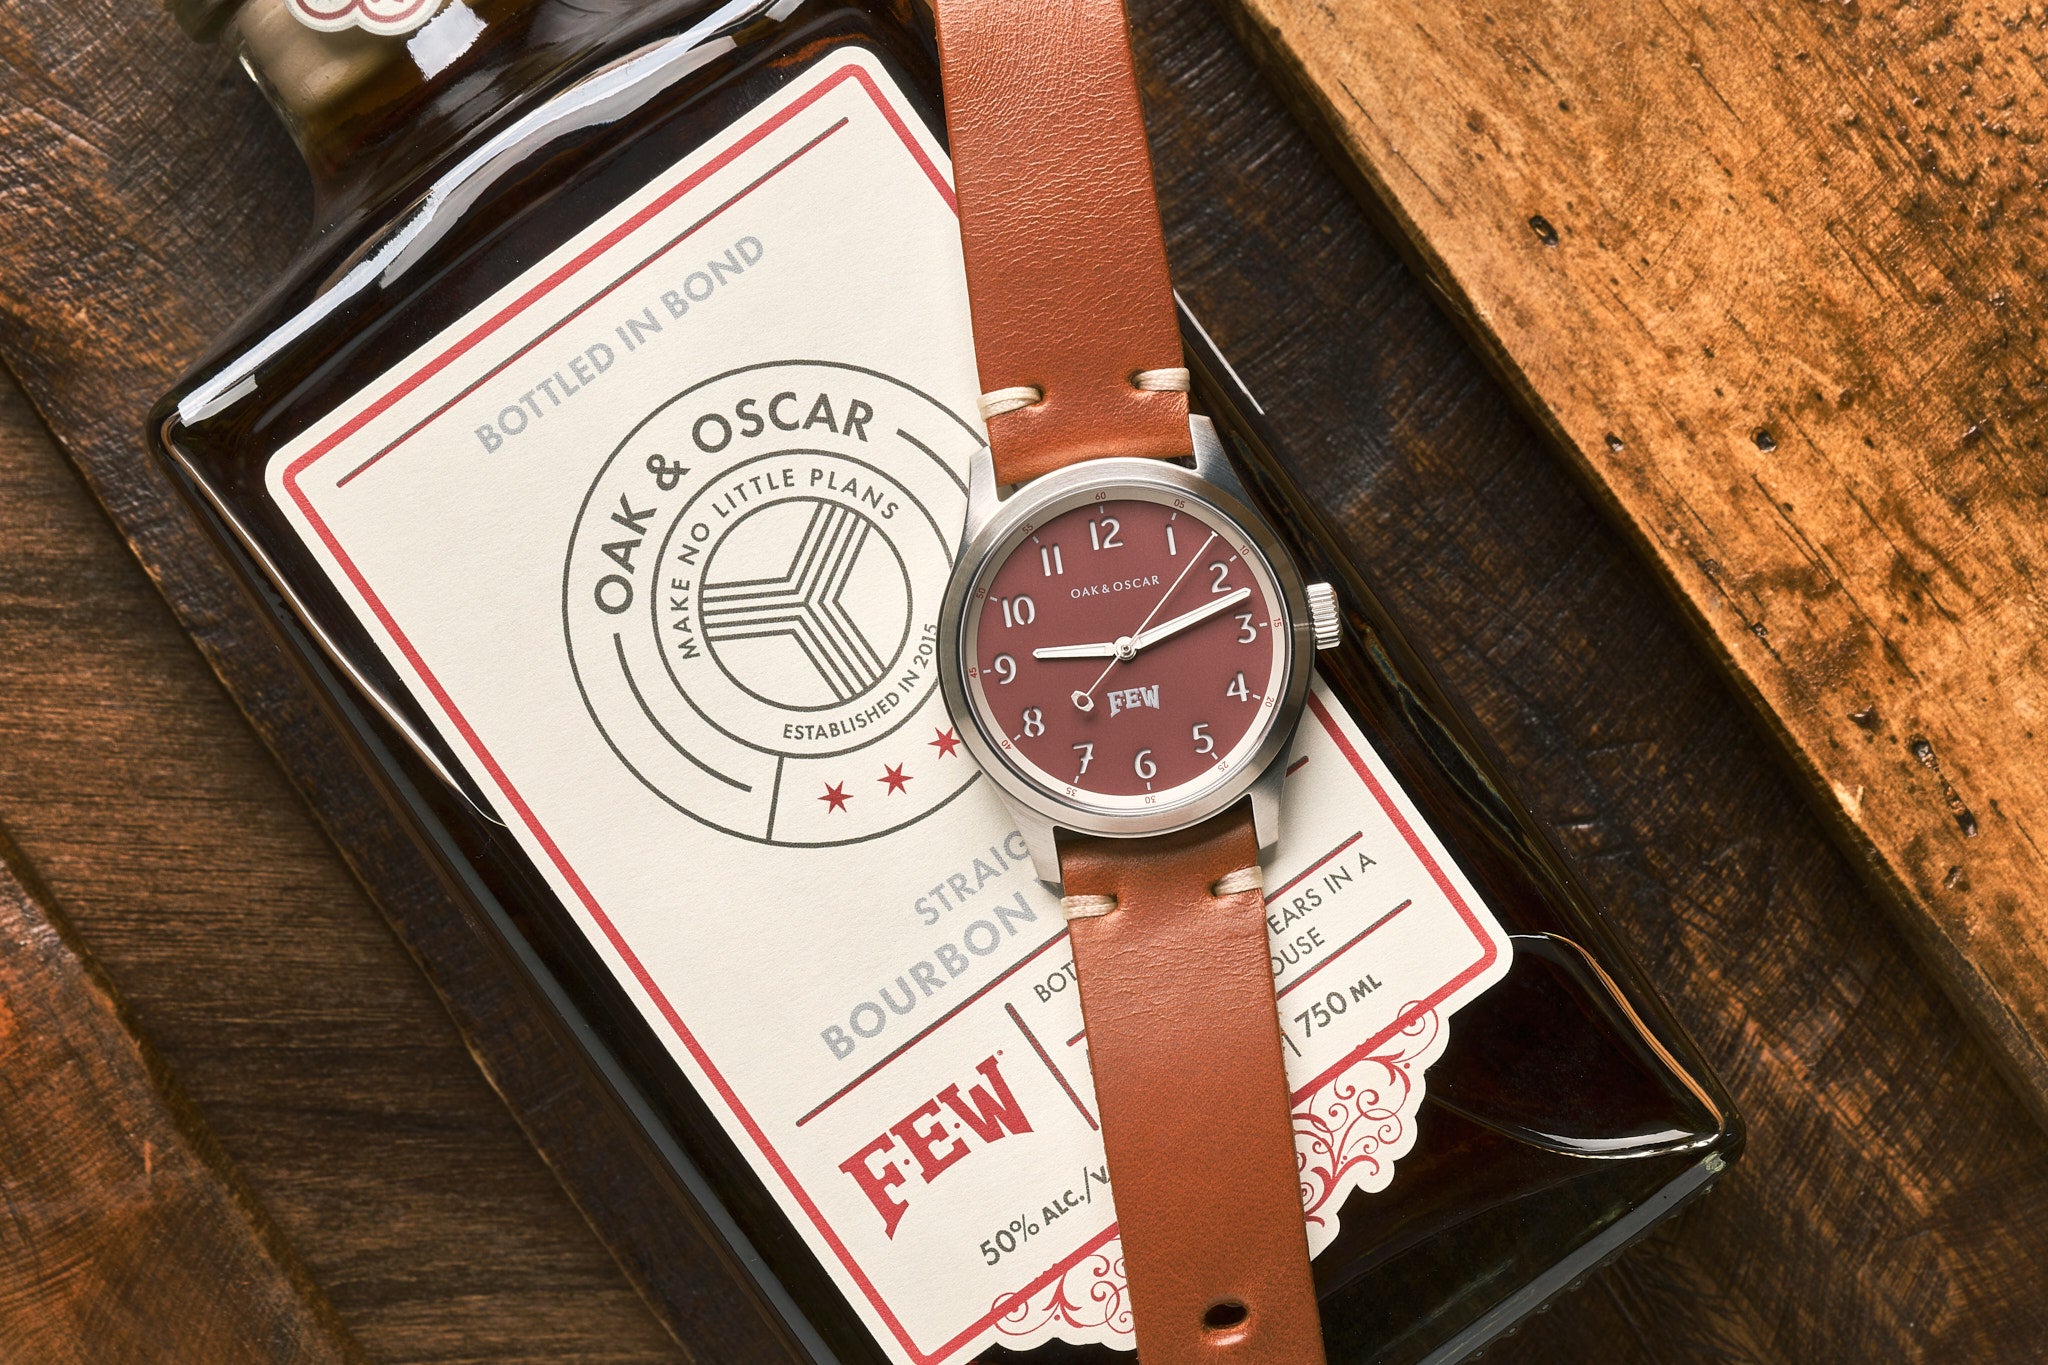 Watch with light red, deep salmon color dial sitting on top of bourbon bottle